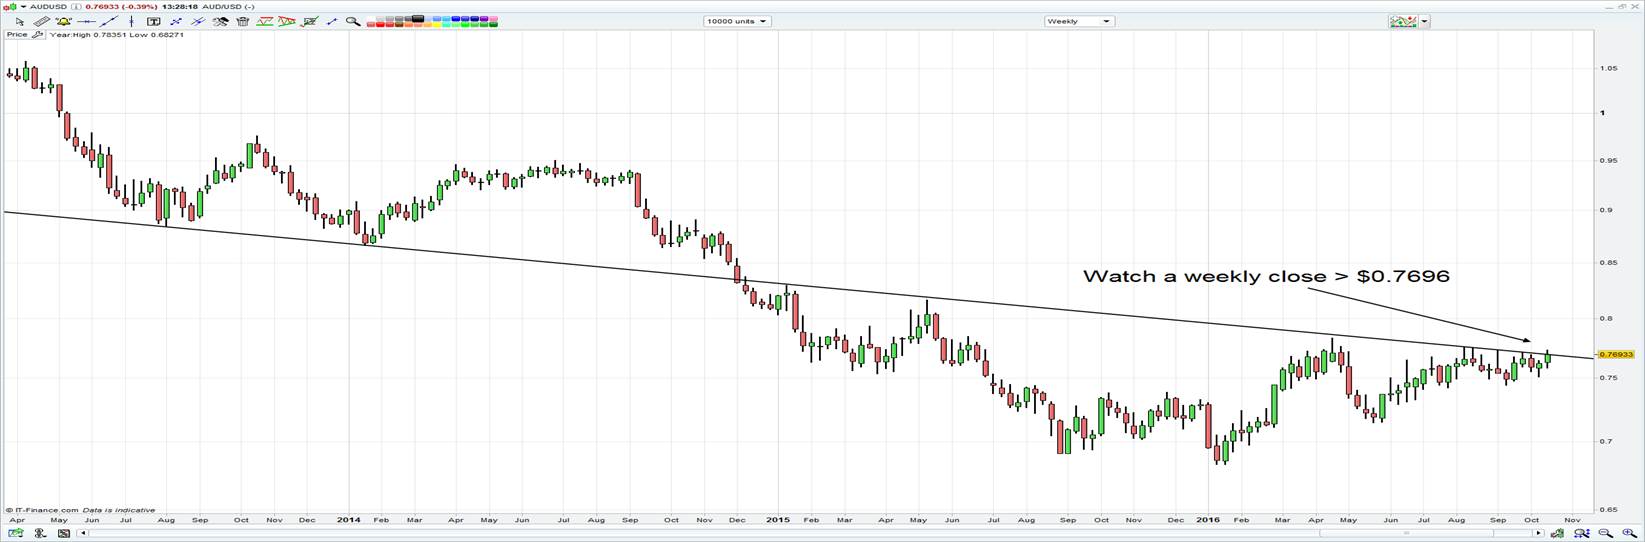 AUD/USD Weekly Candlestick Chart